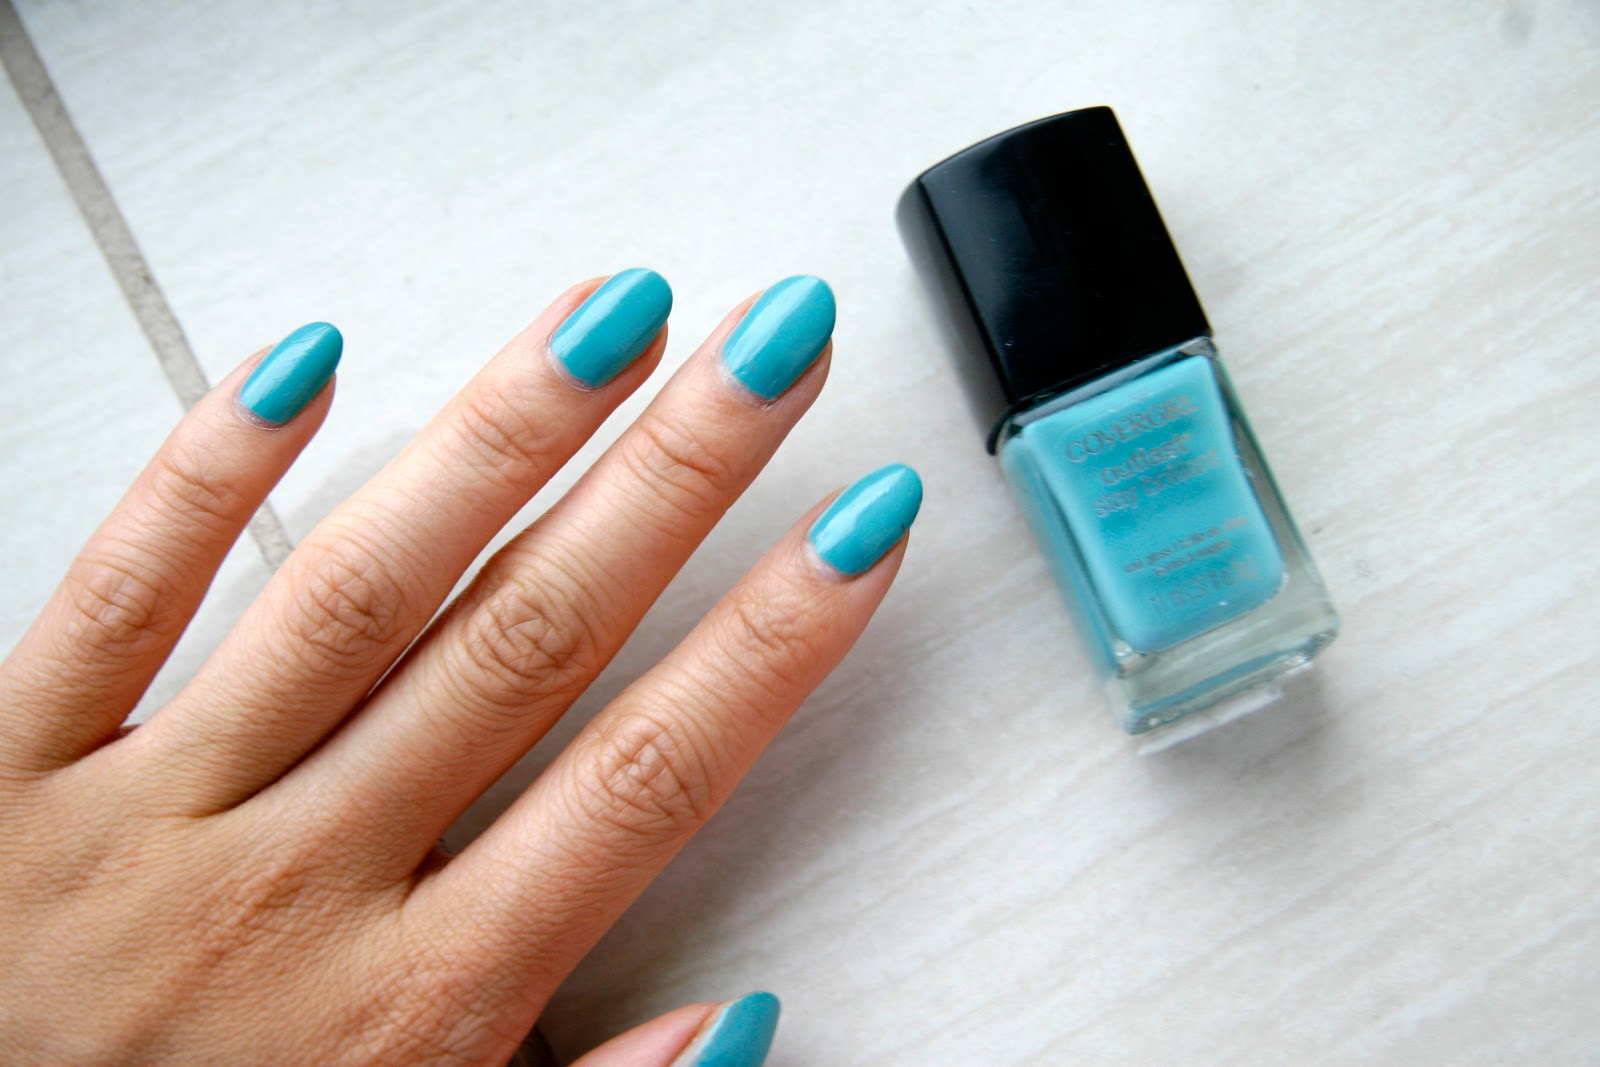 9. Covergirl Outlast Stay Brilliant Nail Gloss in "Sunkissed" - wide 4